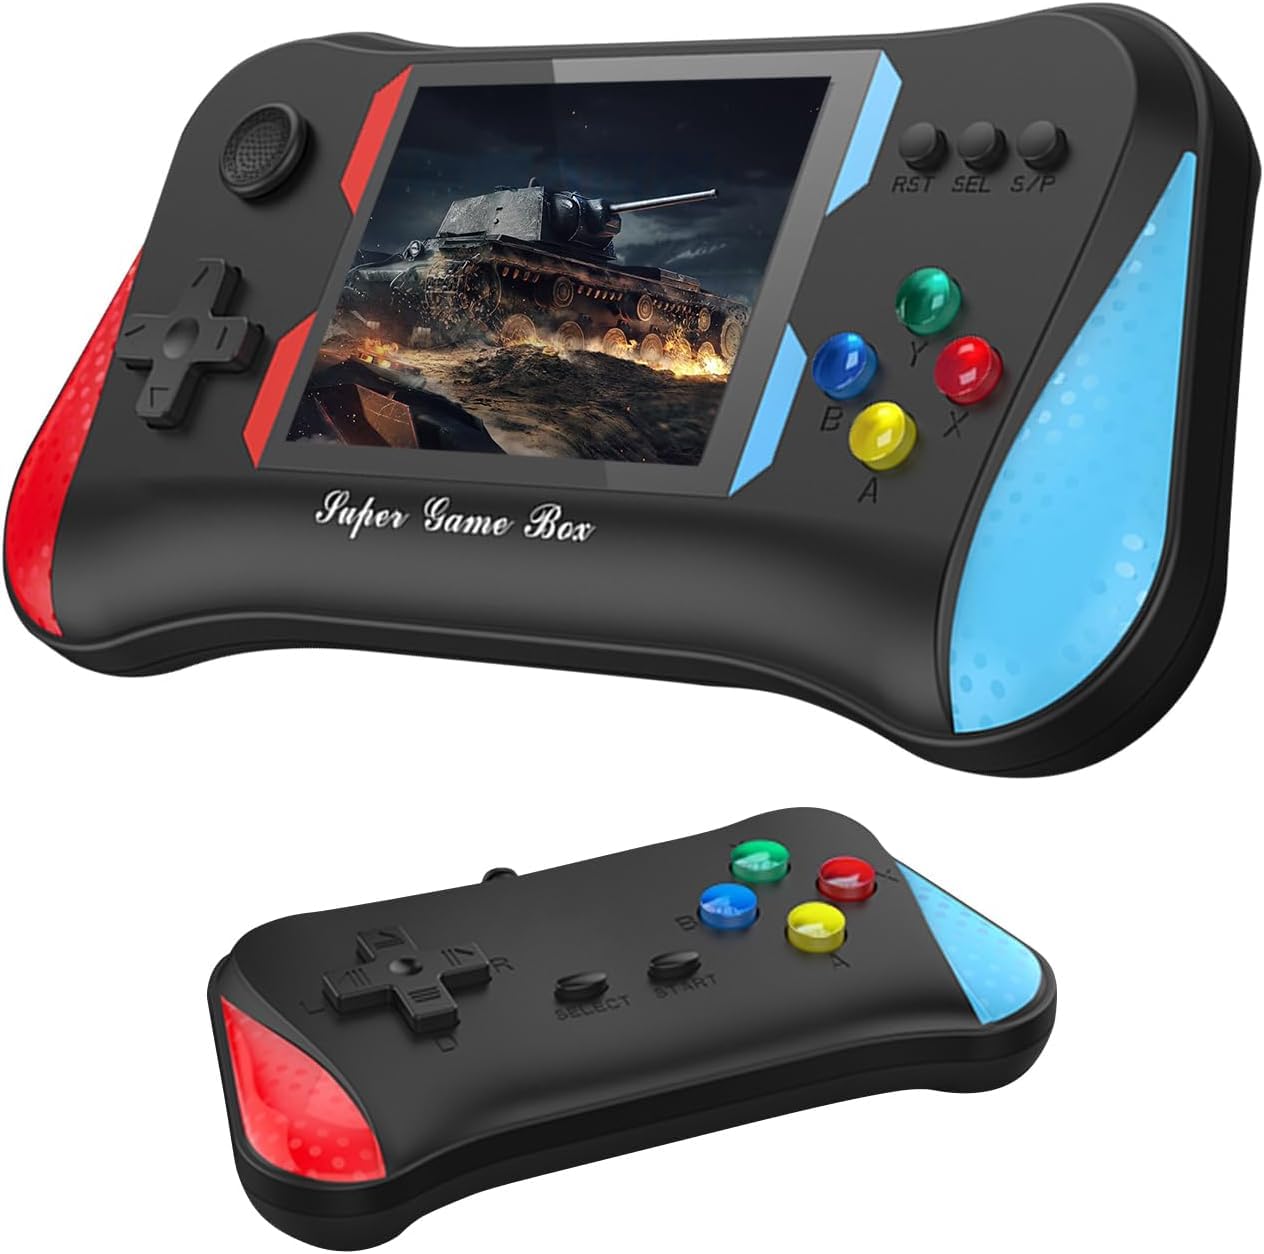 New World Retro SUP Video Game Console X7M Handheld Game Player AV Output Built in 500 Games , Portable Video Game Player